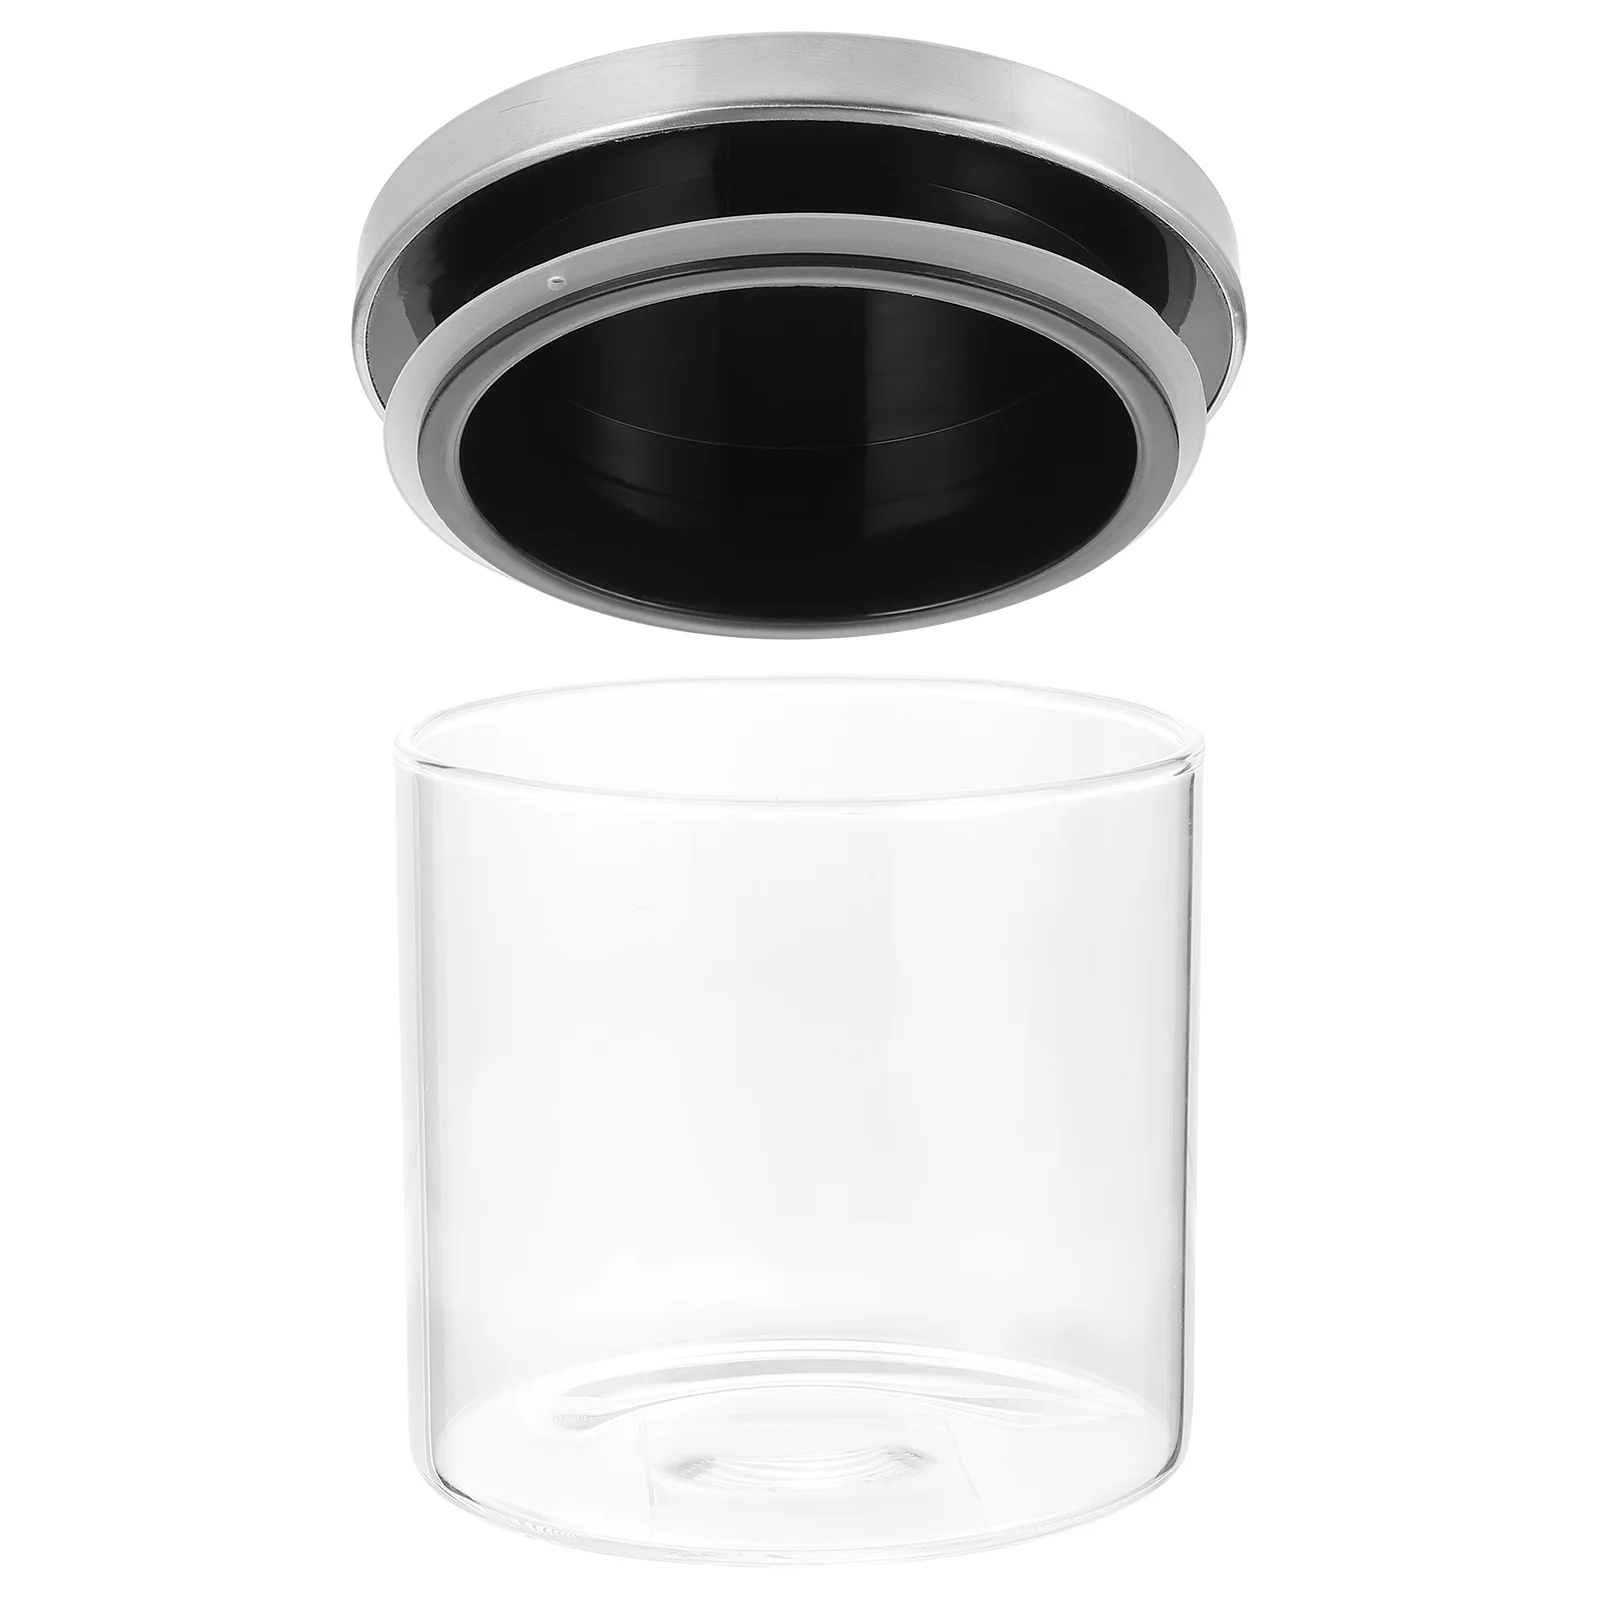 

Glass Jar Food Containers Lids Sealing Spice Cookie Airtight Bottles Reusable Stainless Steel Clear Kitchen